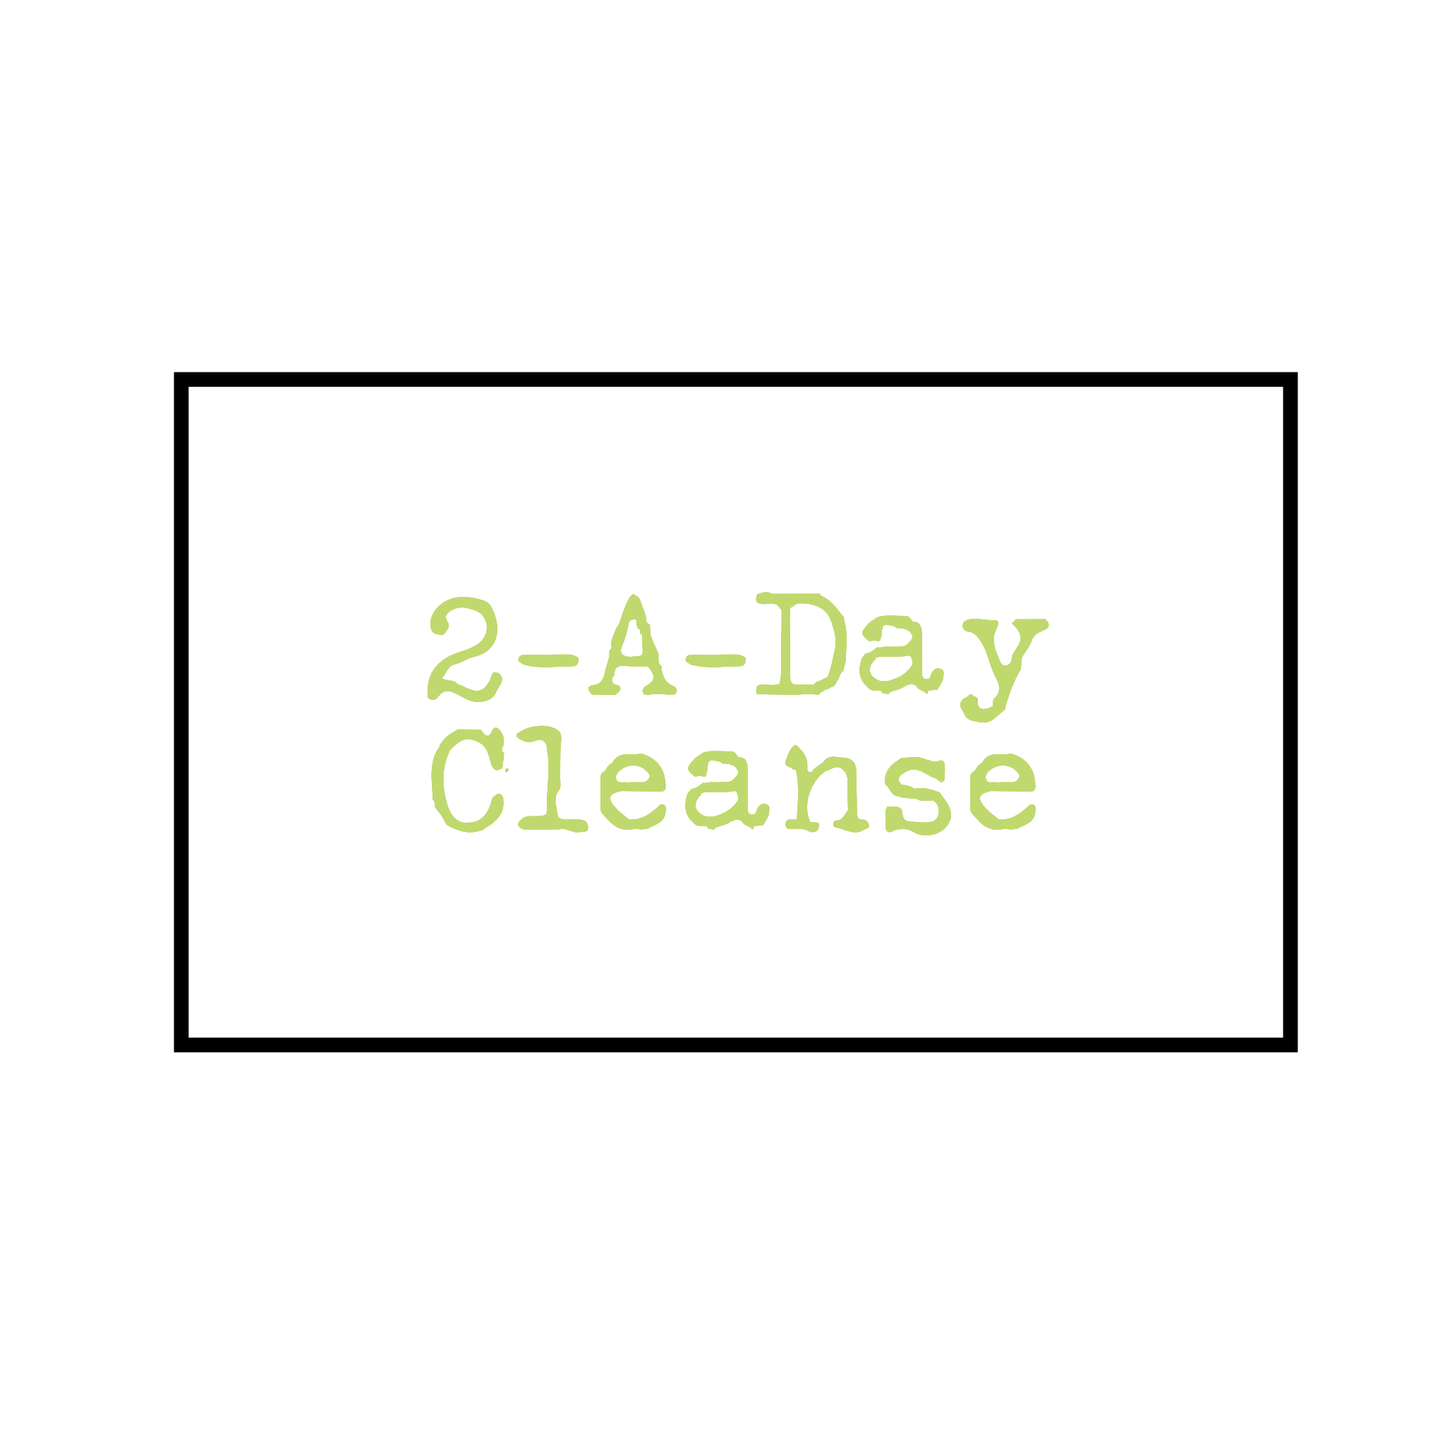 2-A-Day Cleanse